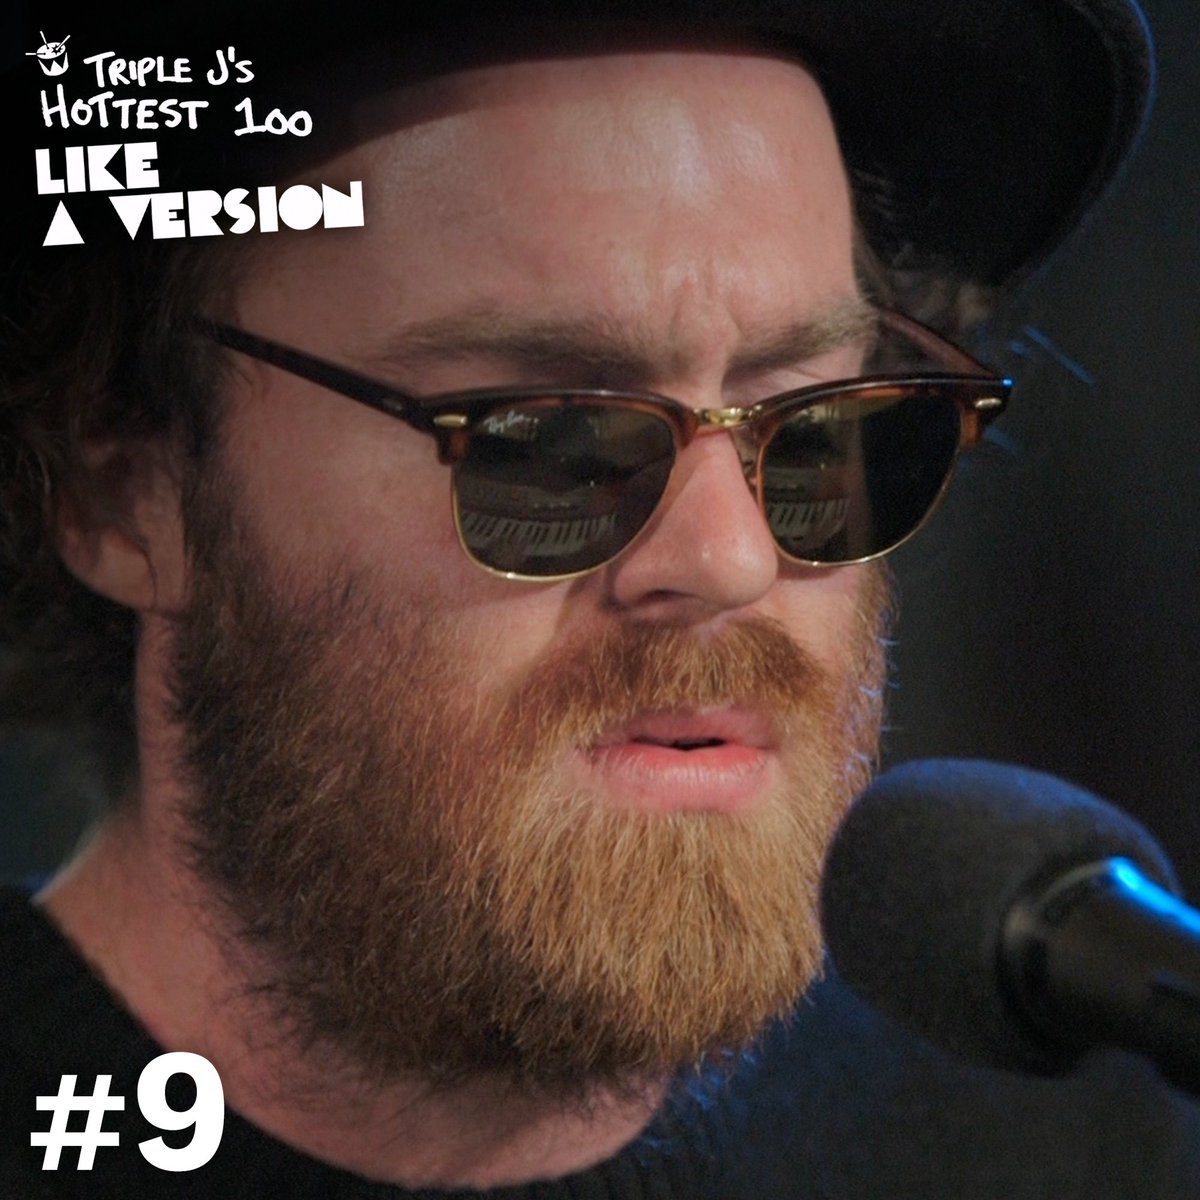 triple j's #Hottest100 of #LikeAVersion #9 @nick_murphy - '(Lover) You Don't Treat Me No Good'